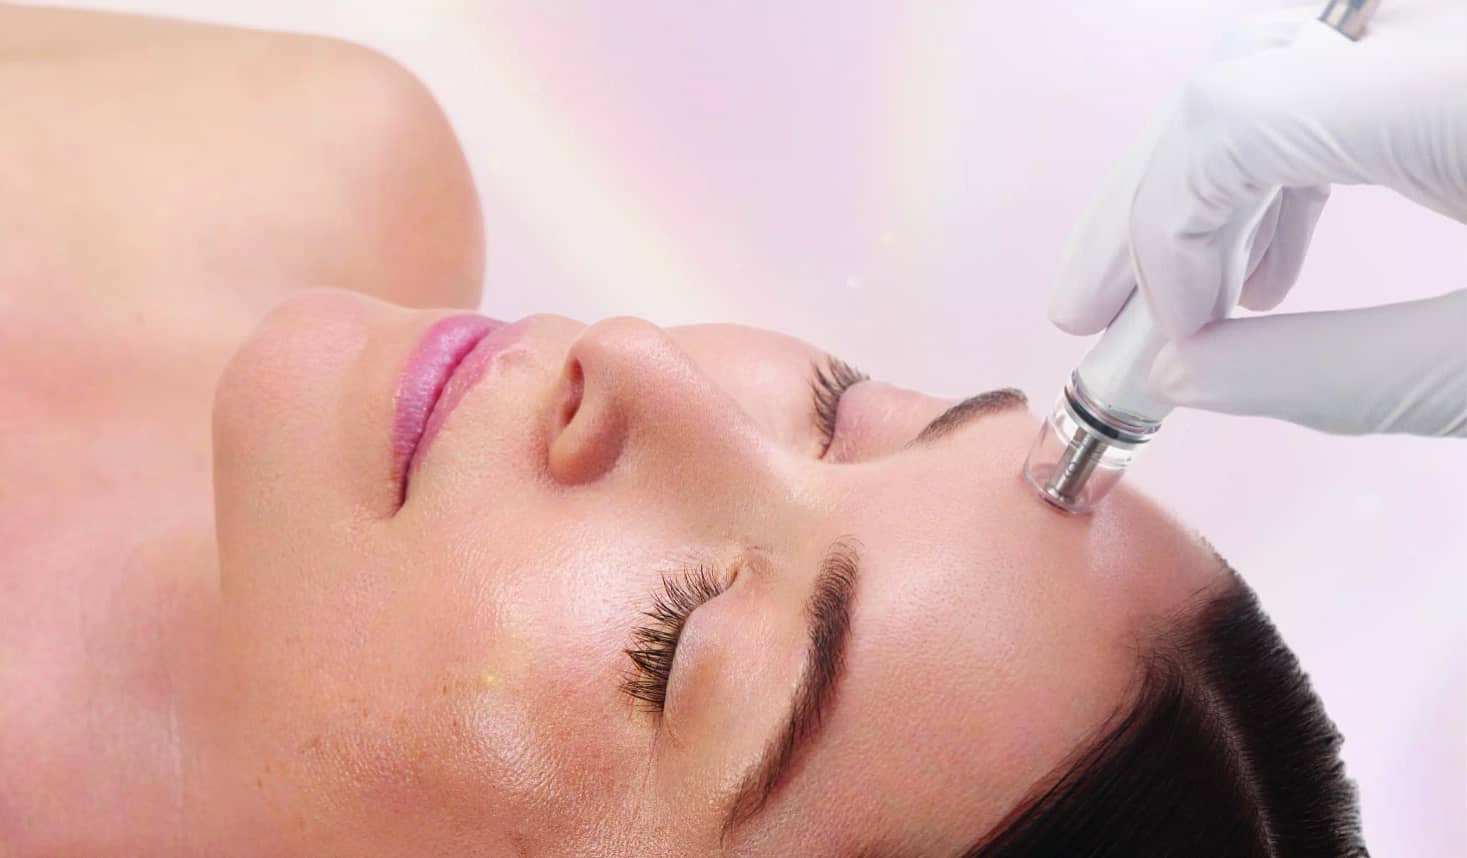 A woman receives a DiamondGlow facial treatment, experiencing a rejuvenating exfoliation and infusion process for radiant, glowing skin.